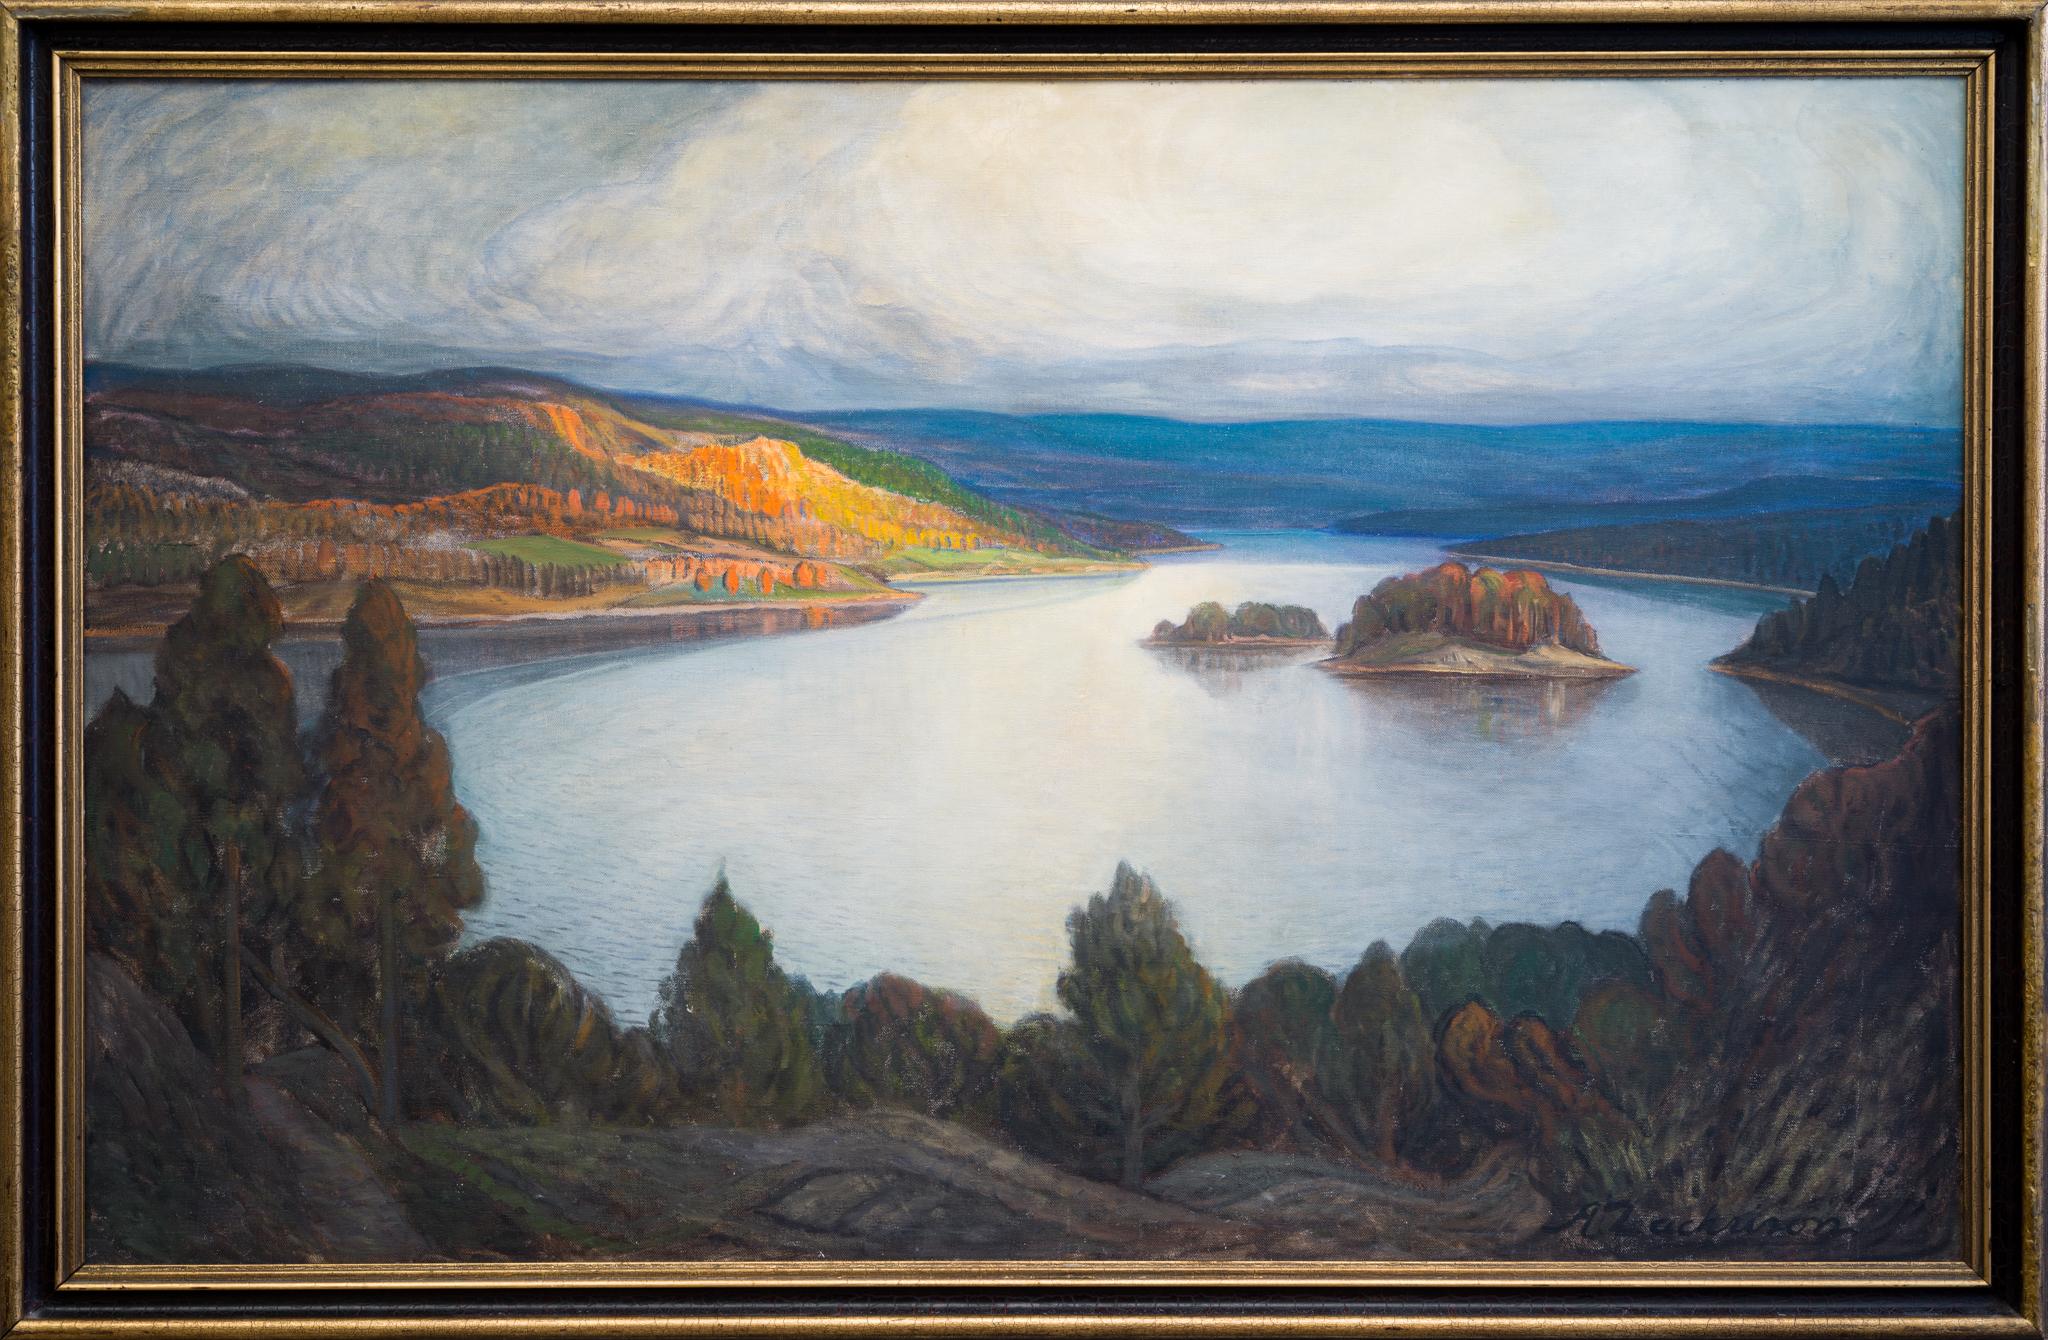 Axel Zachrison was a Swedish painter known for his landscapes from Dalsland. Born in Tydje, Dalsland, Zachrison's artistic journey was shaped by his experiences at sea and his encounters with influential artists such as Otto Hesselbom, a relative on